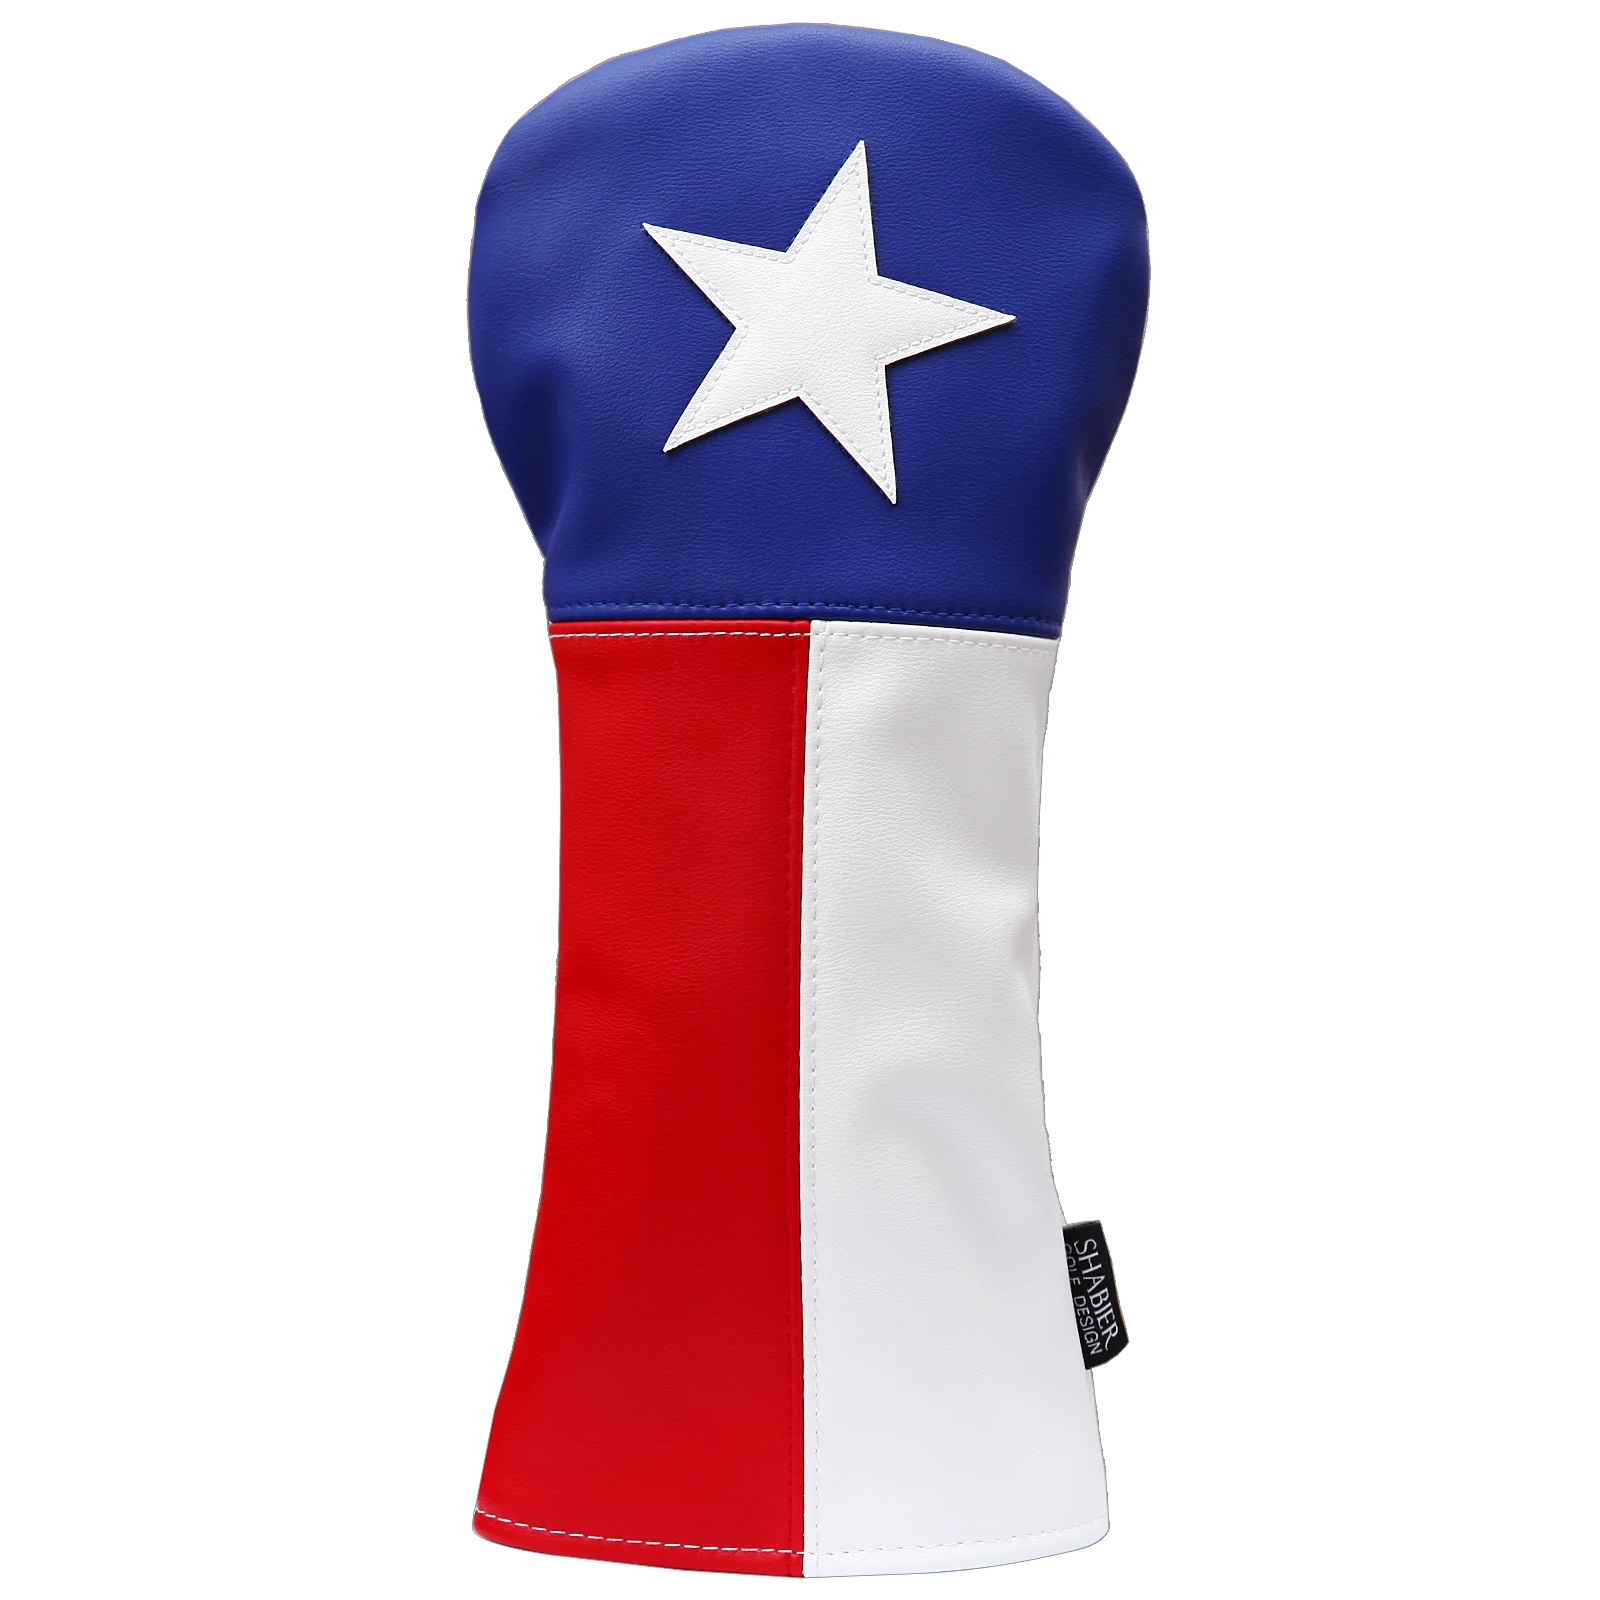 

Texas Golf Club Head Cover - Premium, Hand-Made Leather Lone Star Design Headcovers - TX Pride Styled